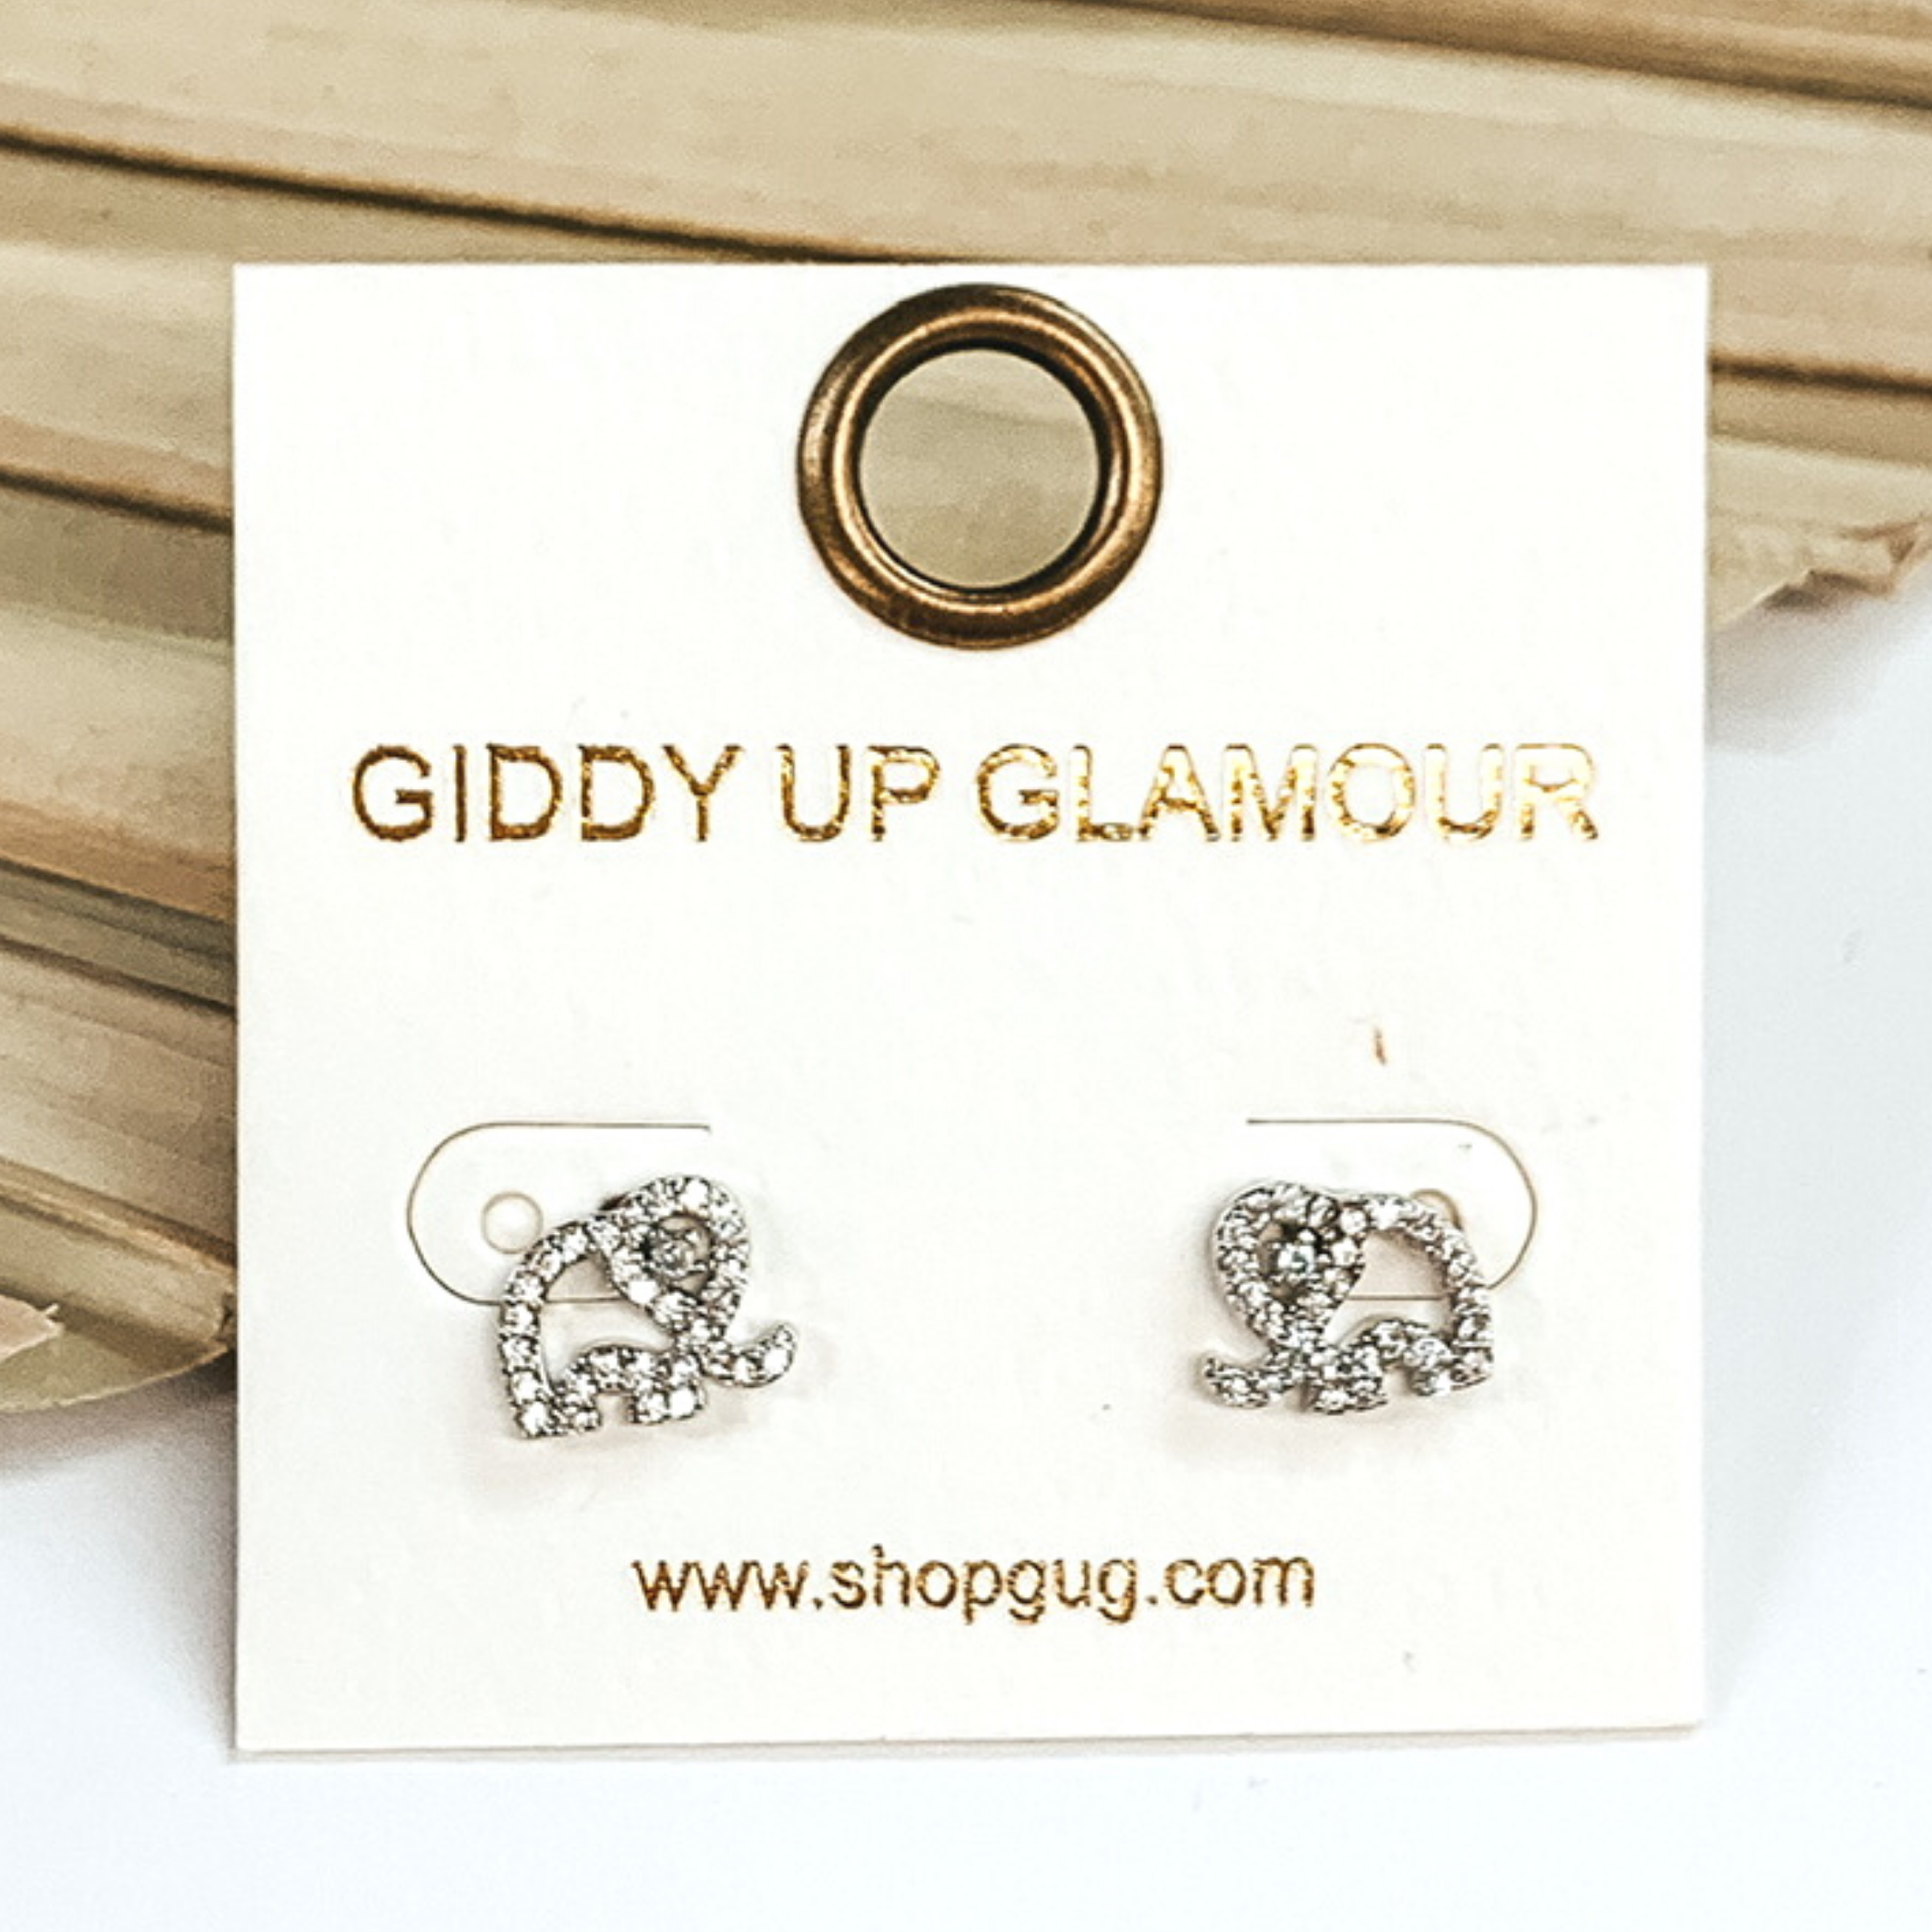 Small, silver elephant outline stud earrings with clear crystals. These earrings are pictured on a white earrings card on a white and green background. 